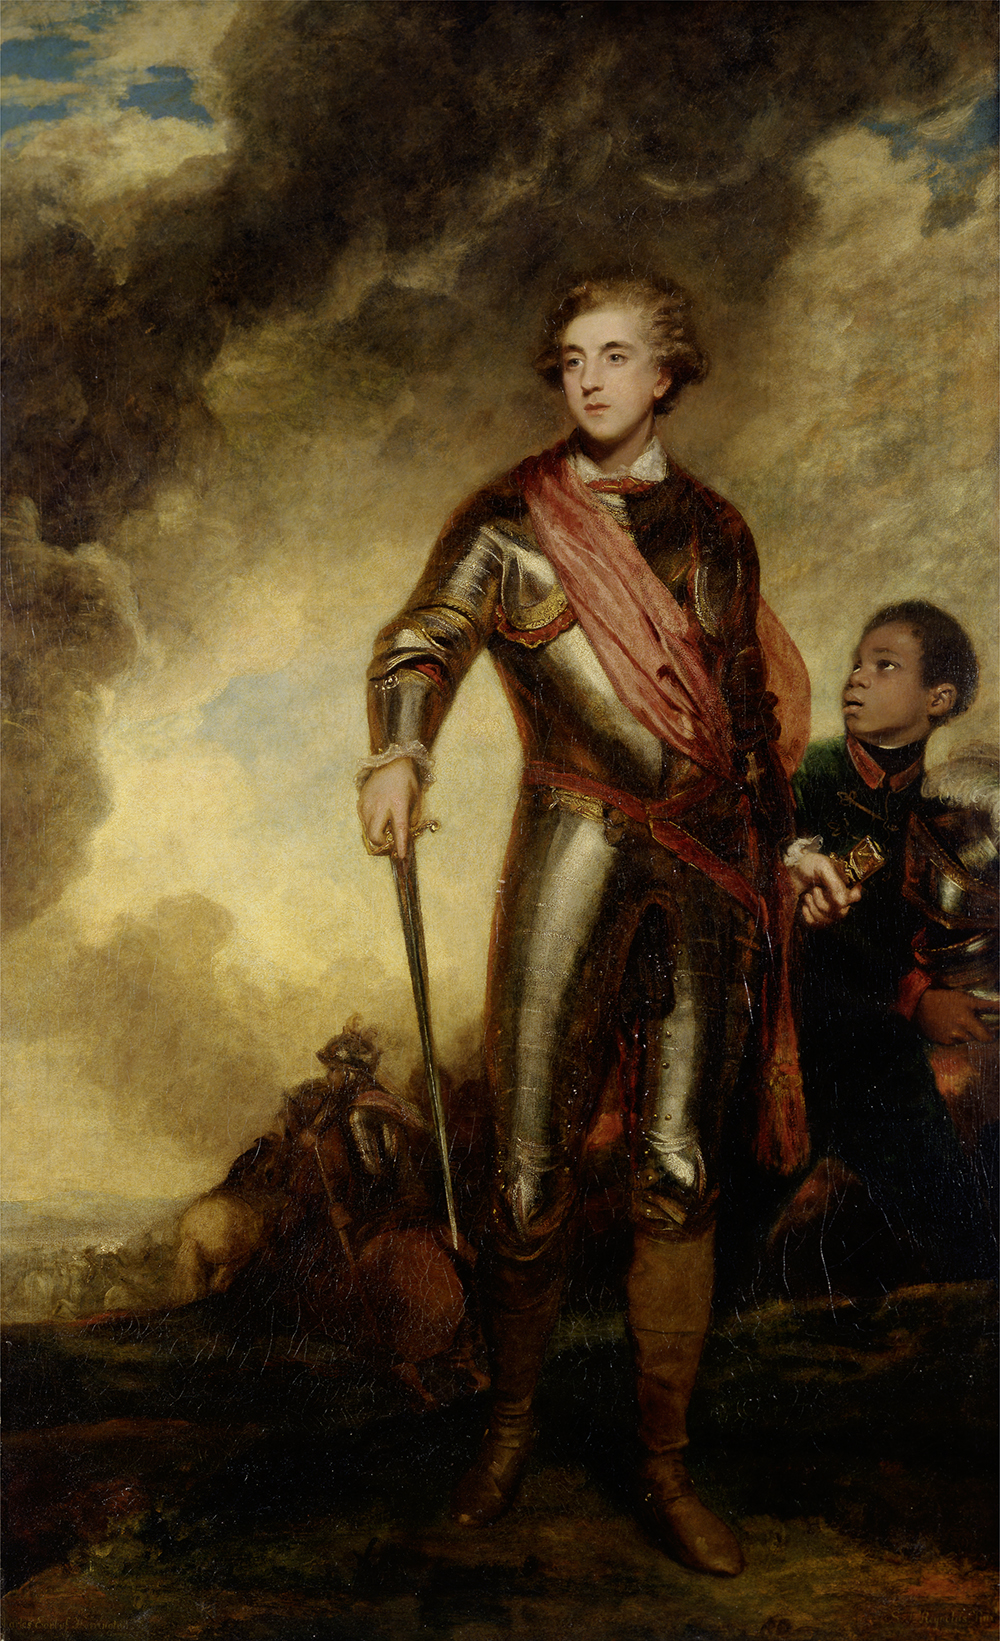 Charles Stanhope, Third Earl of Harrington, and a Servant, by Joshua Reynolds, 1782 .Yale Center for British Art. 